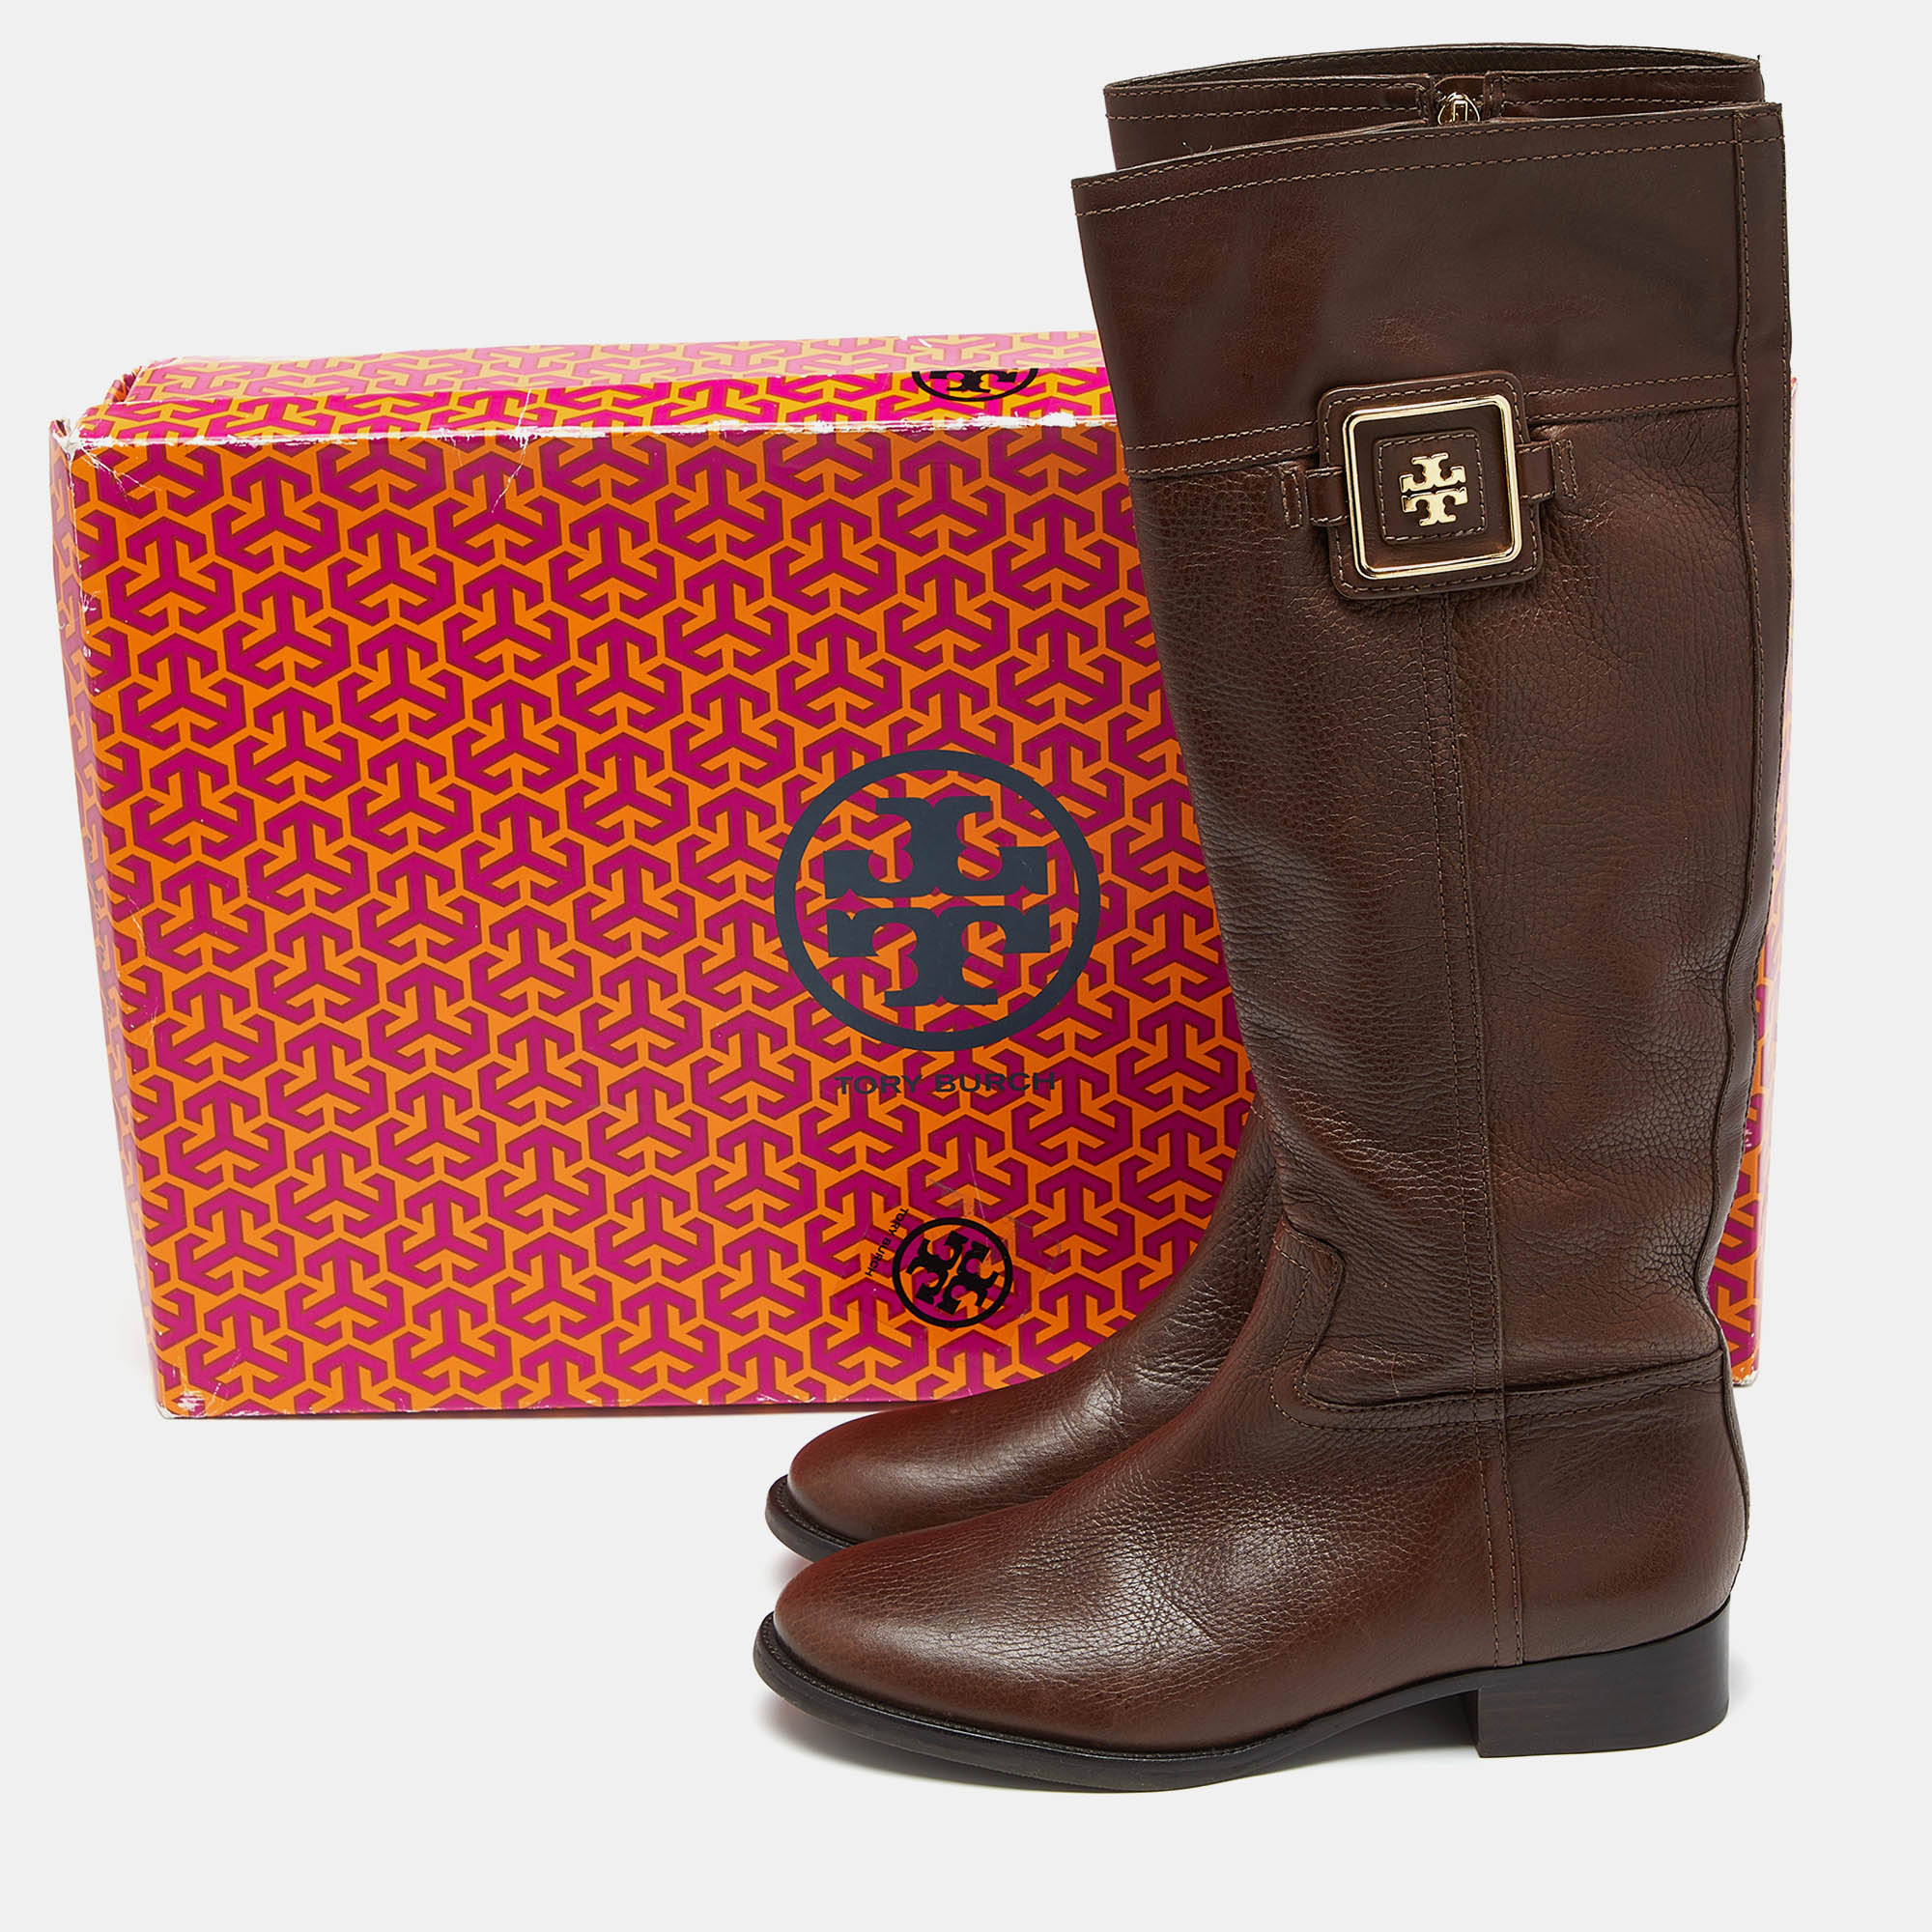 Tory Burch Brown Leather Knee Length Boots Size 39